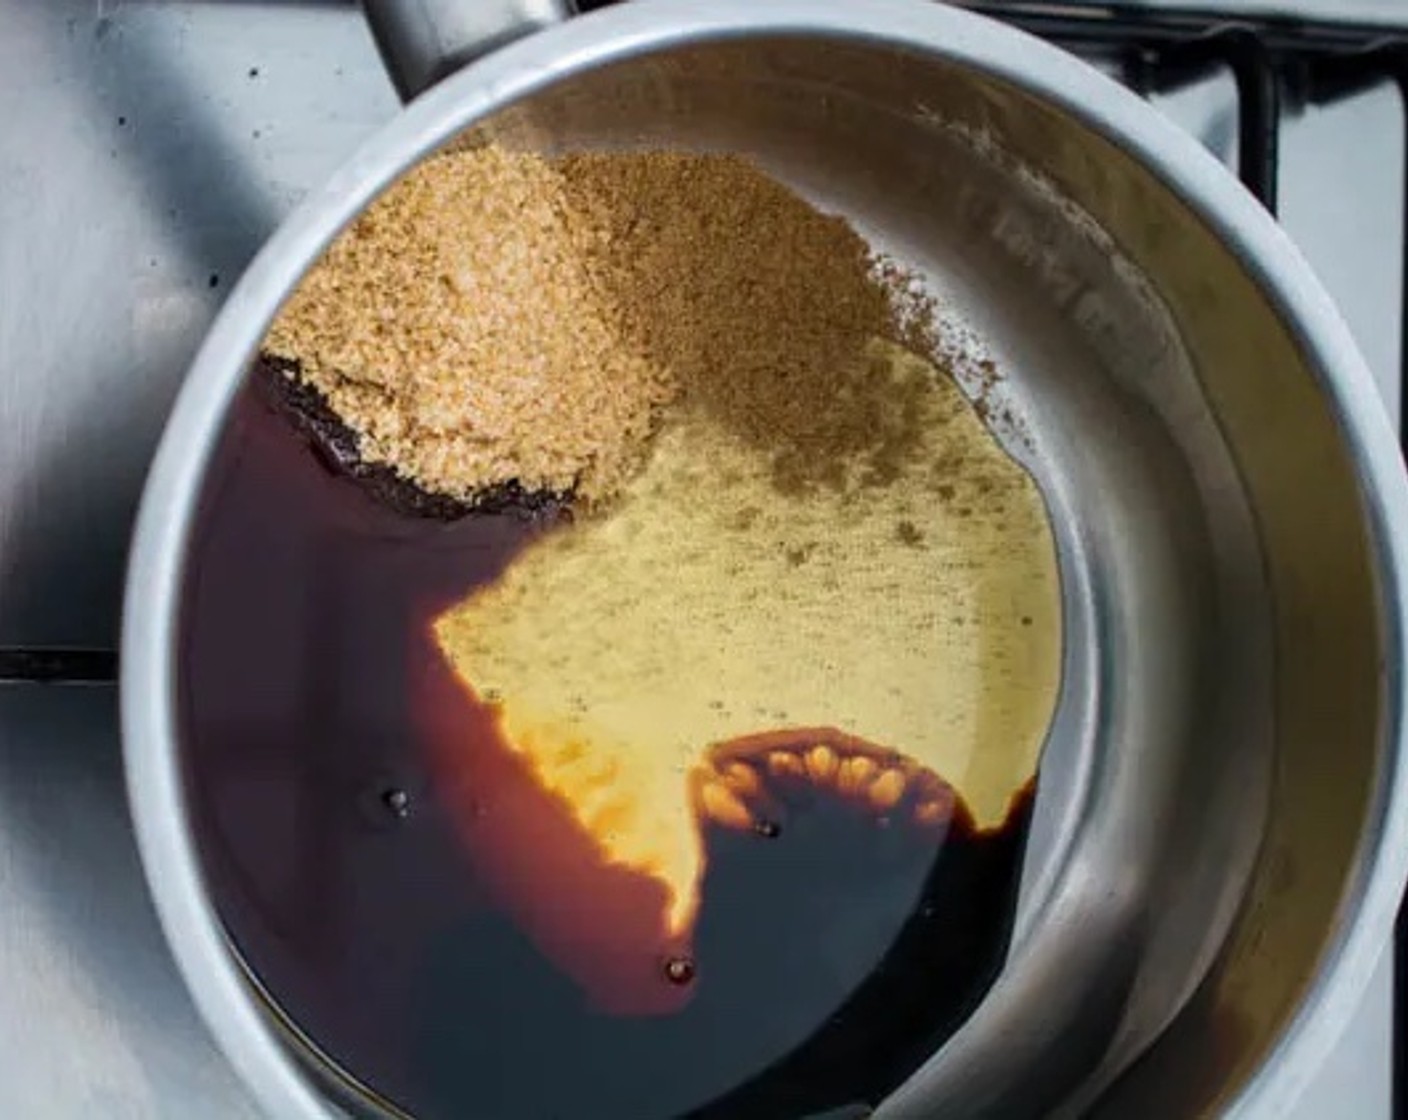 step 5 In a small saucepan, prepare the sauce by combining Honey (2 Tbsp), Light Soy Sauce (2 Tbsp), Dark Soy Sauce (1 tsp), Brown Sugar (2 Tbsp), and Chinese Five Spice Powder (1/4 tsp). Place the saucepan over medium heat.